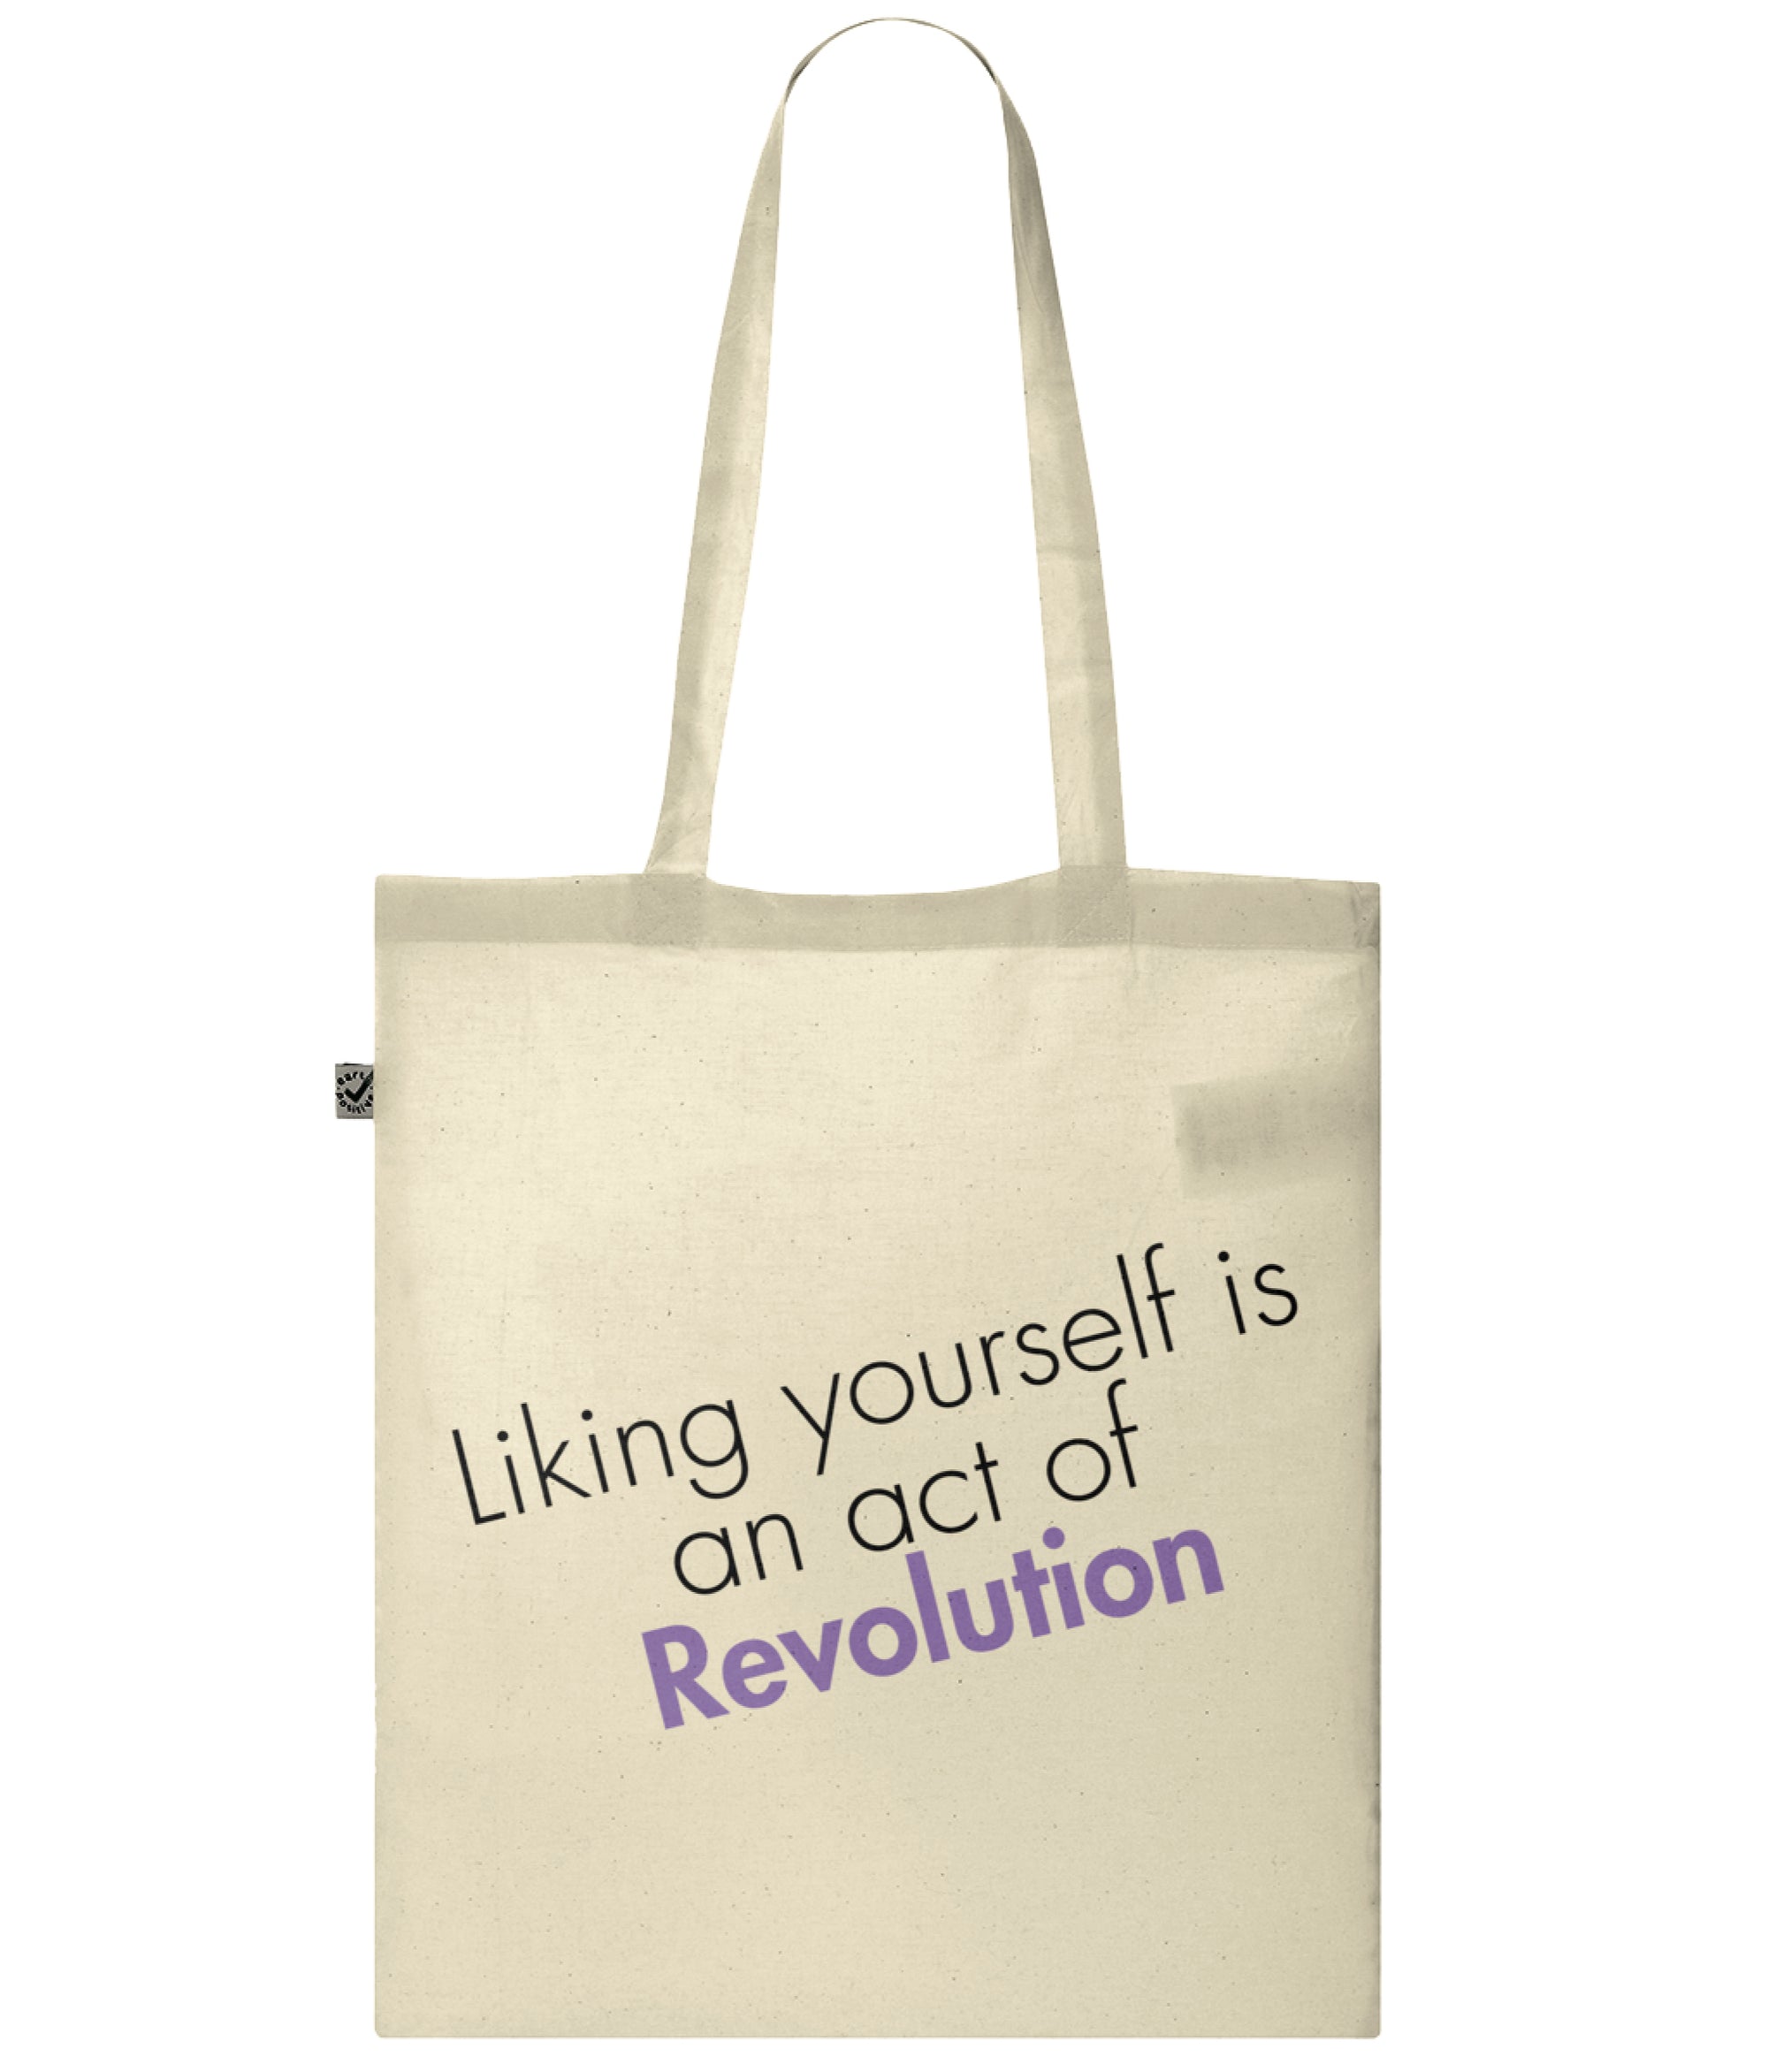 Liking Yourself Is An Act Of Revolution Organic Combed Cotton Tote Bag Natural